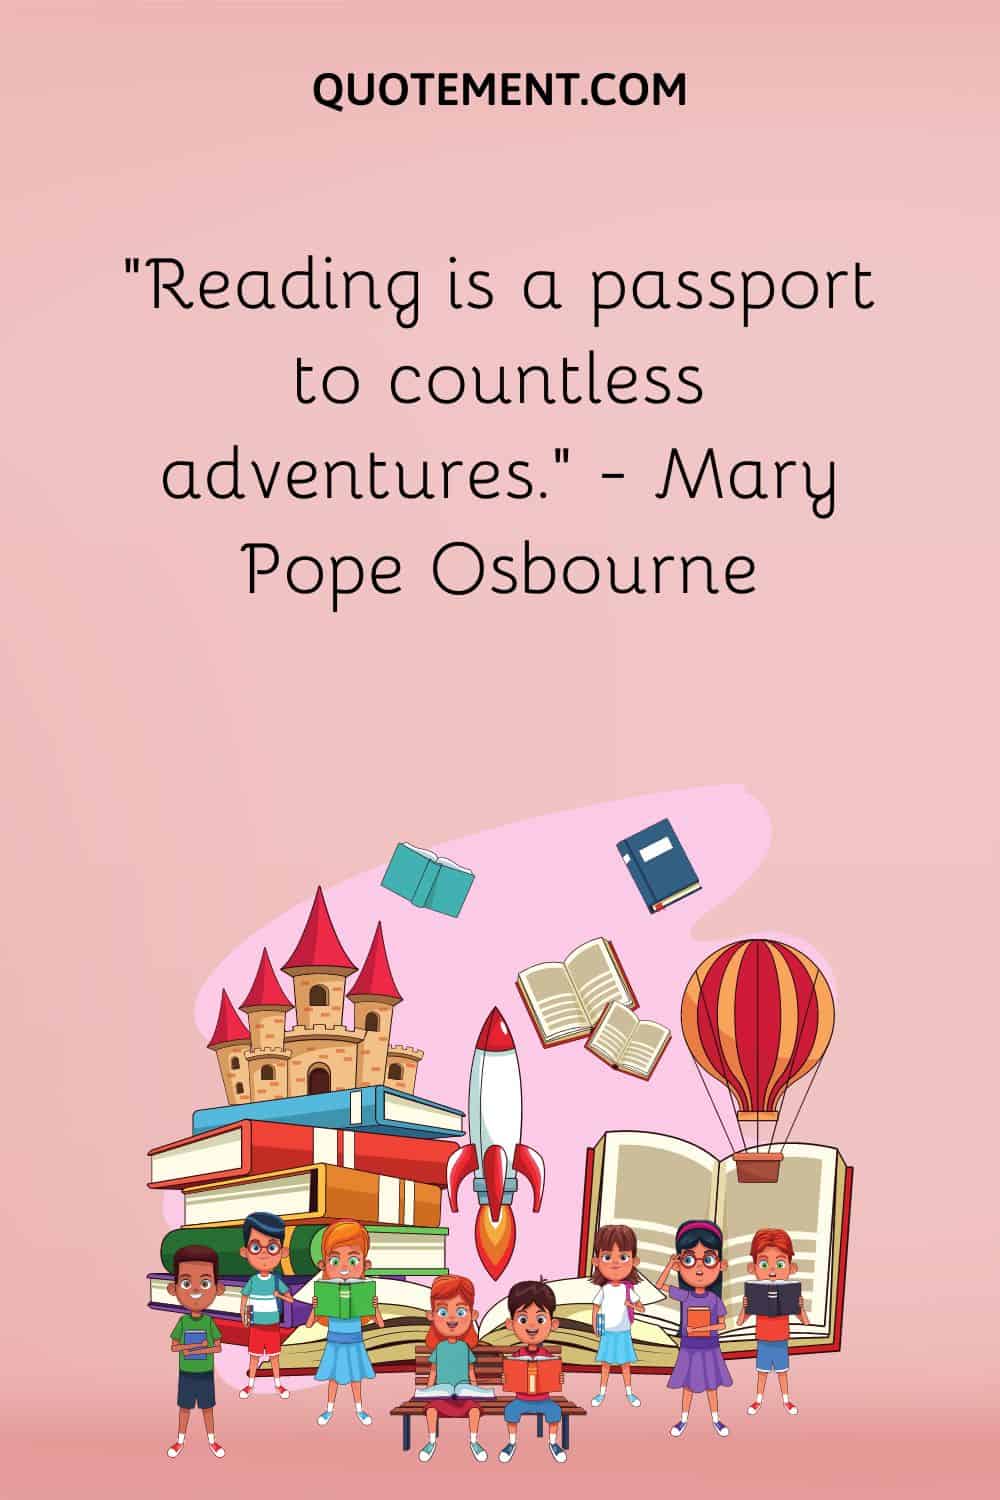 “Reading is a passport to countless adventures.” — Mary Pope Osbourne